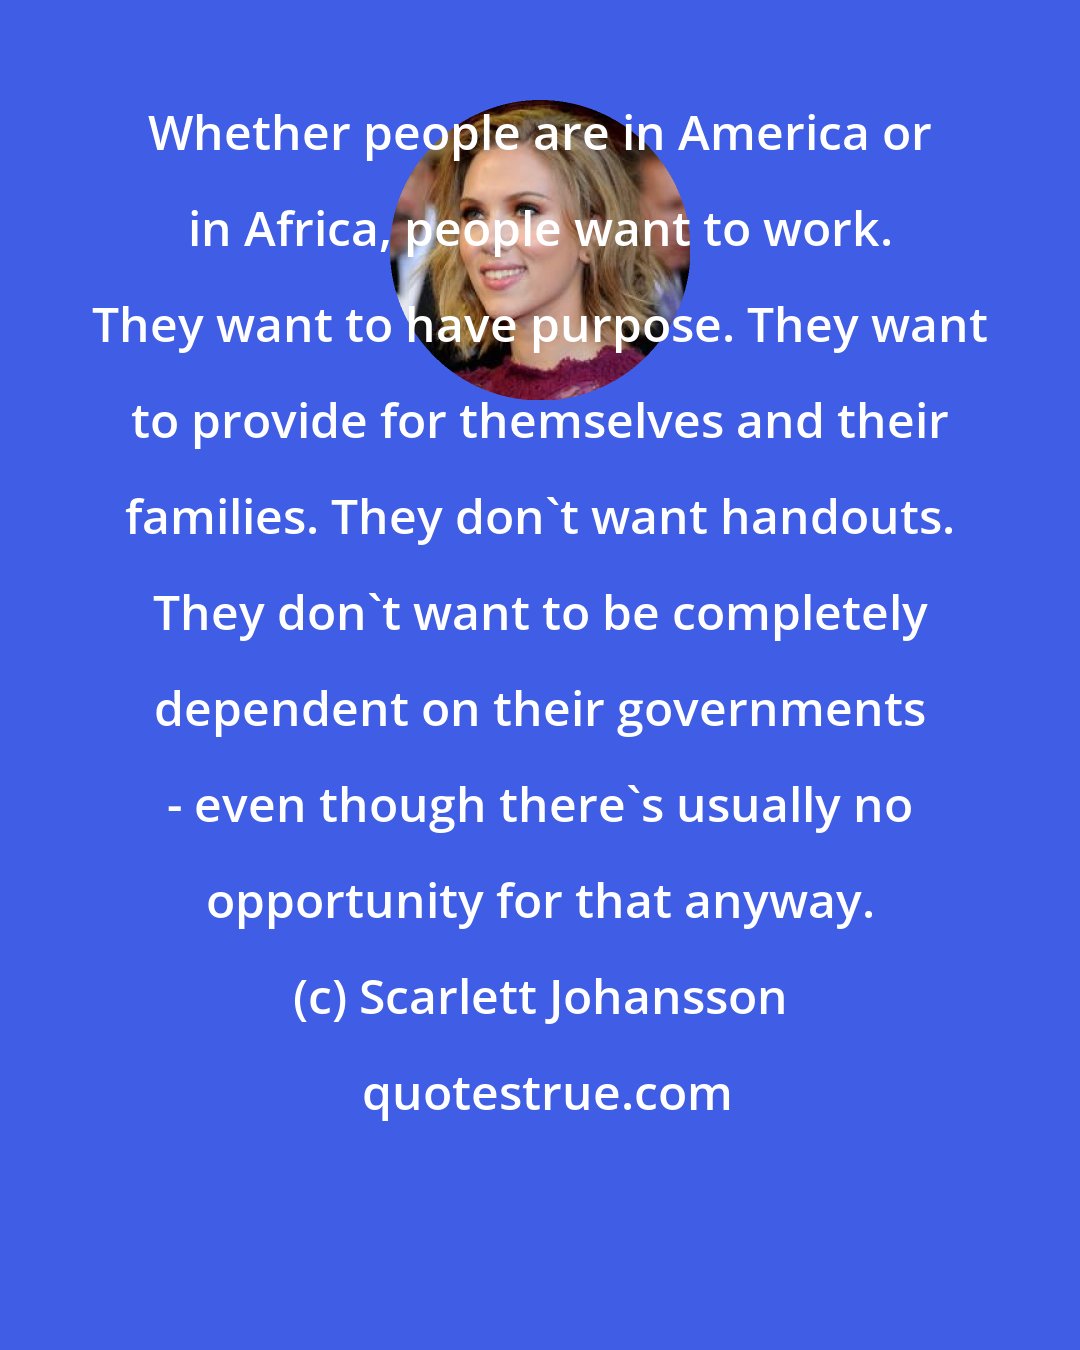 Scarlett Johansson: Whether people are in America or in Africa, people want to work. They want to have purpose. They want to provide for themselves and their families. They don't want handouts. They don't want to be completely dependent on their governments - even though there's usually no opportunity for that anyway.